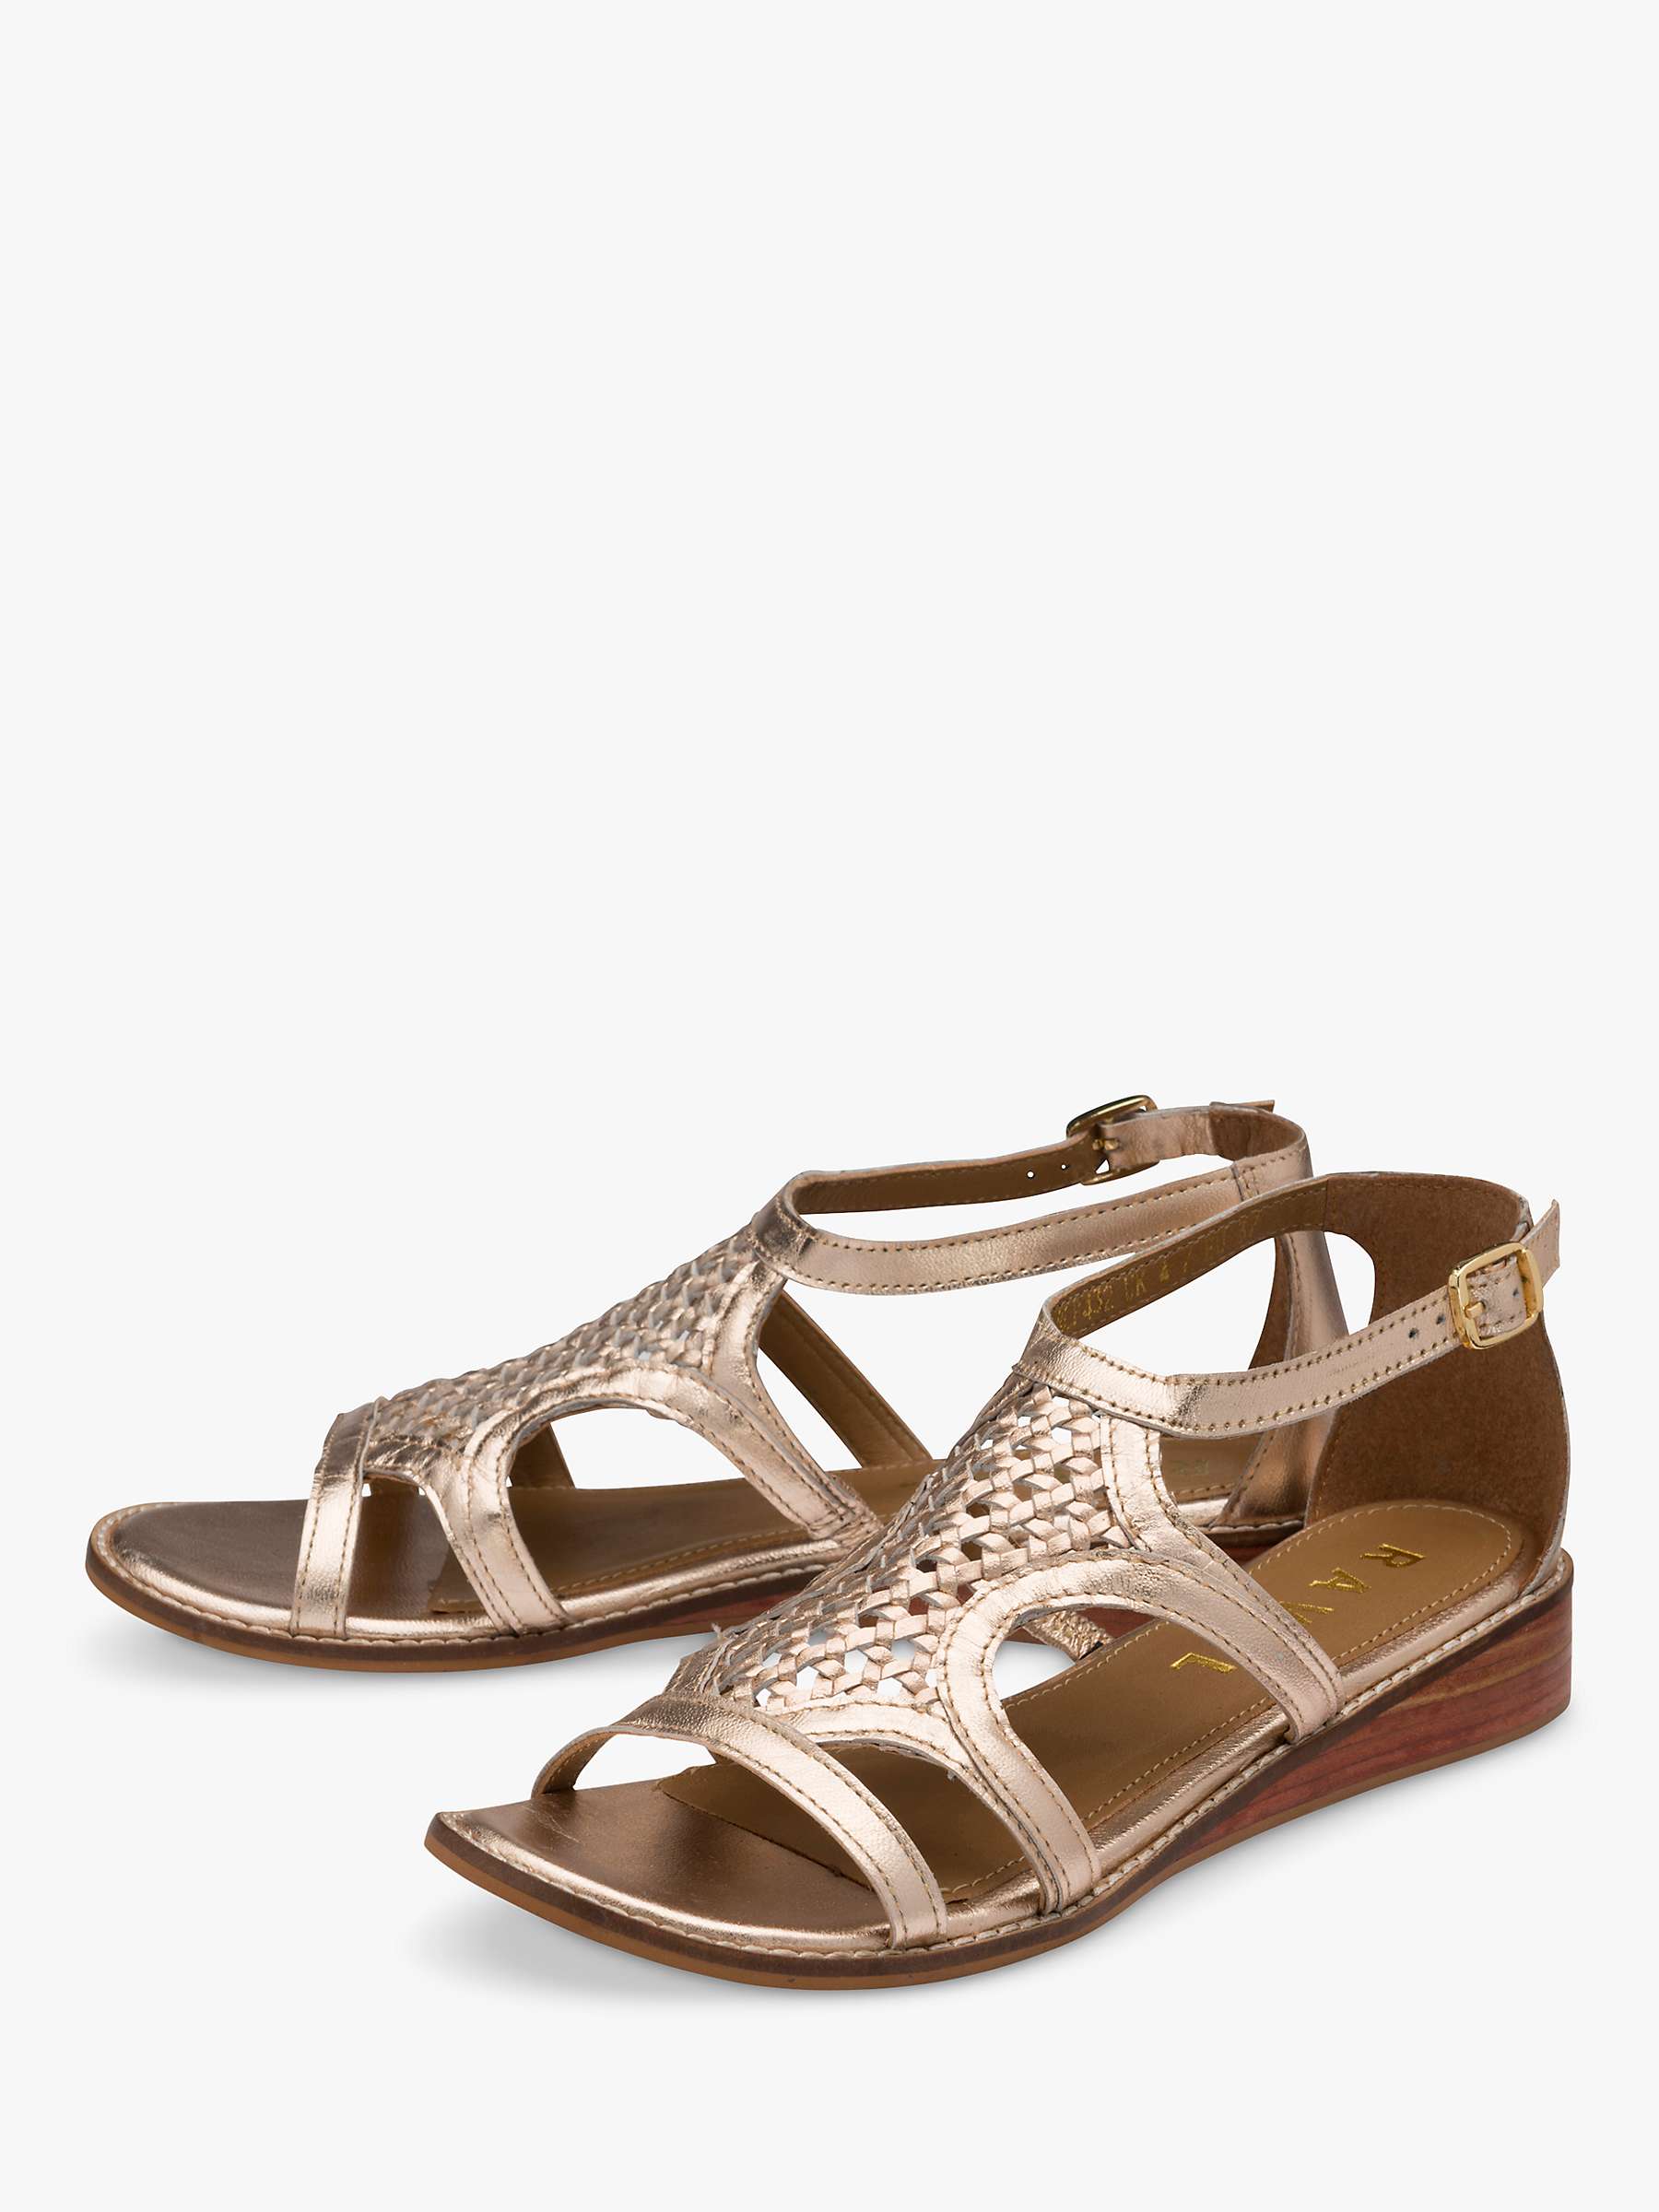 Buy Ravel Cardwell Leather Sandals Online at johnlewis.com